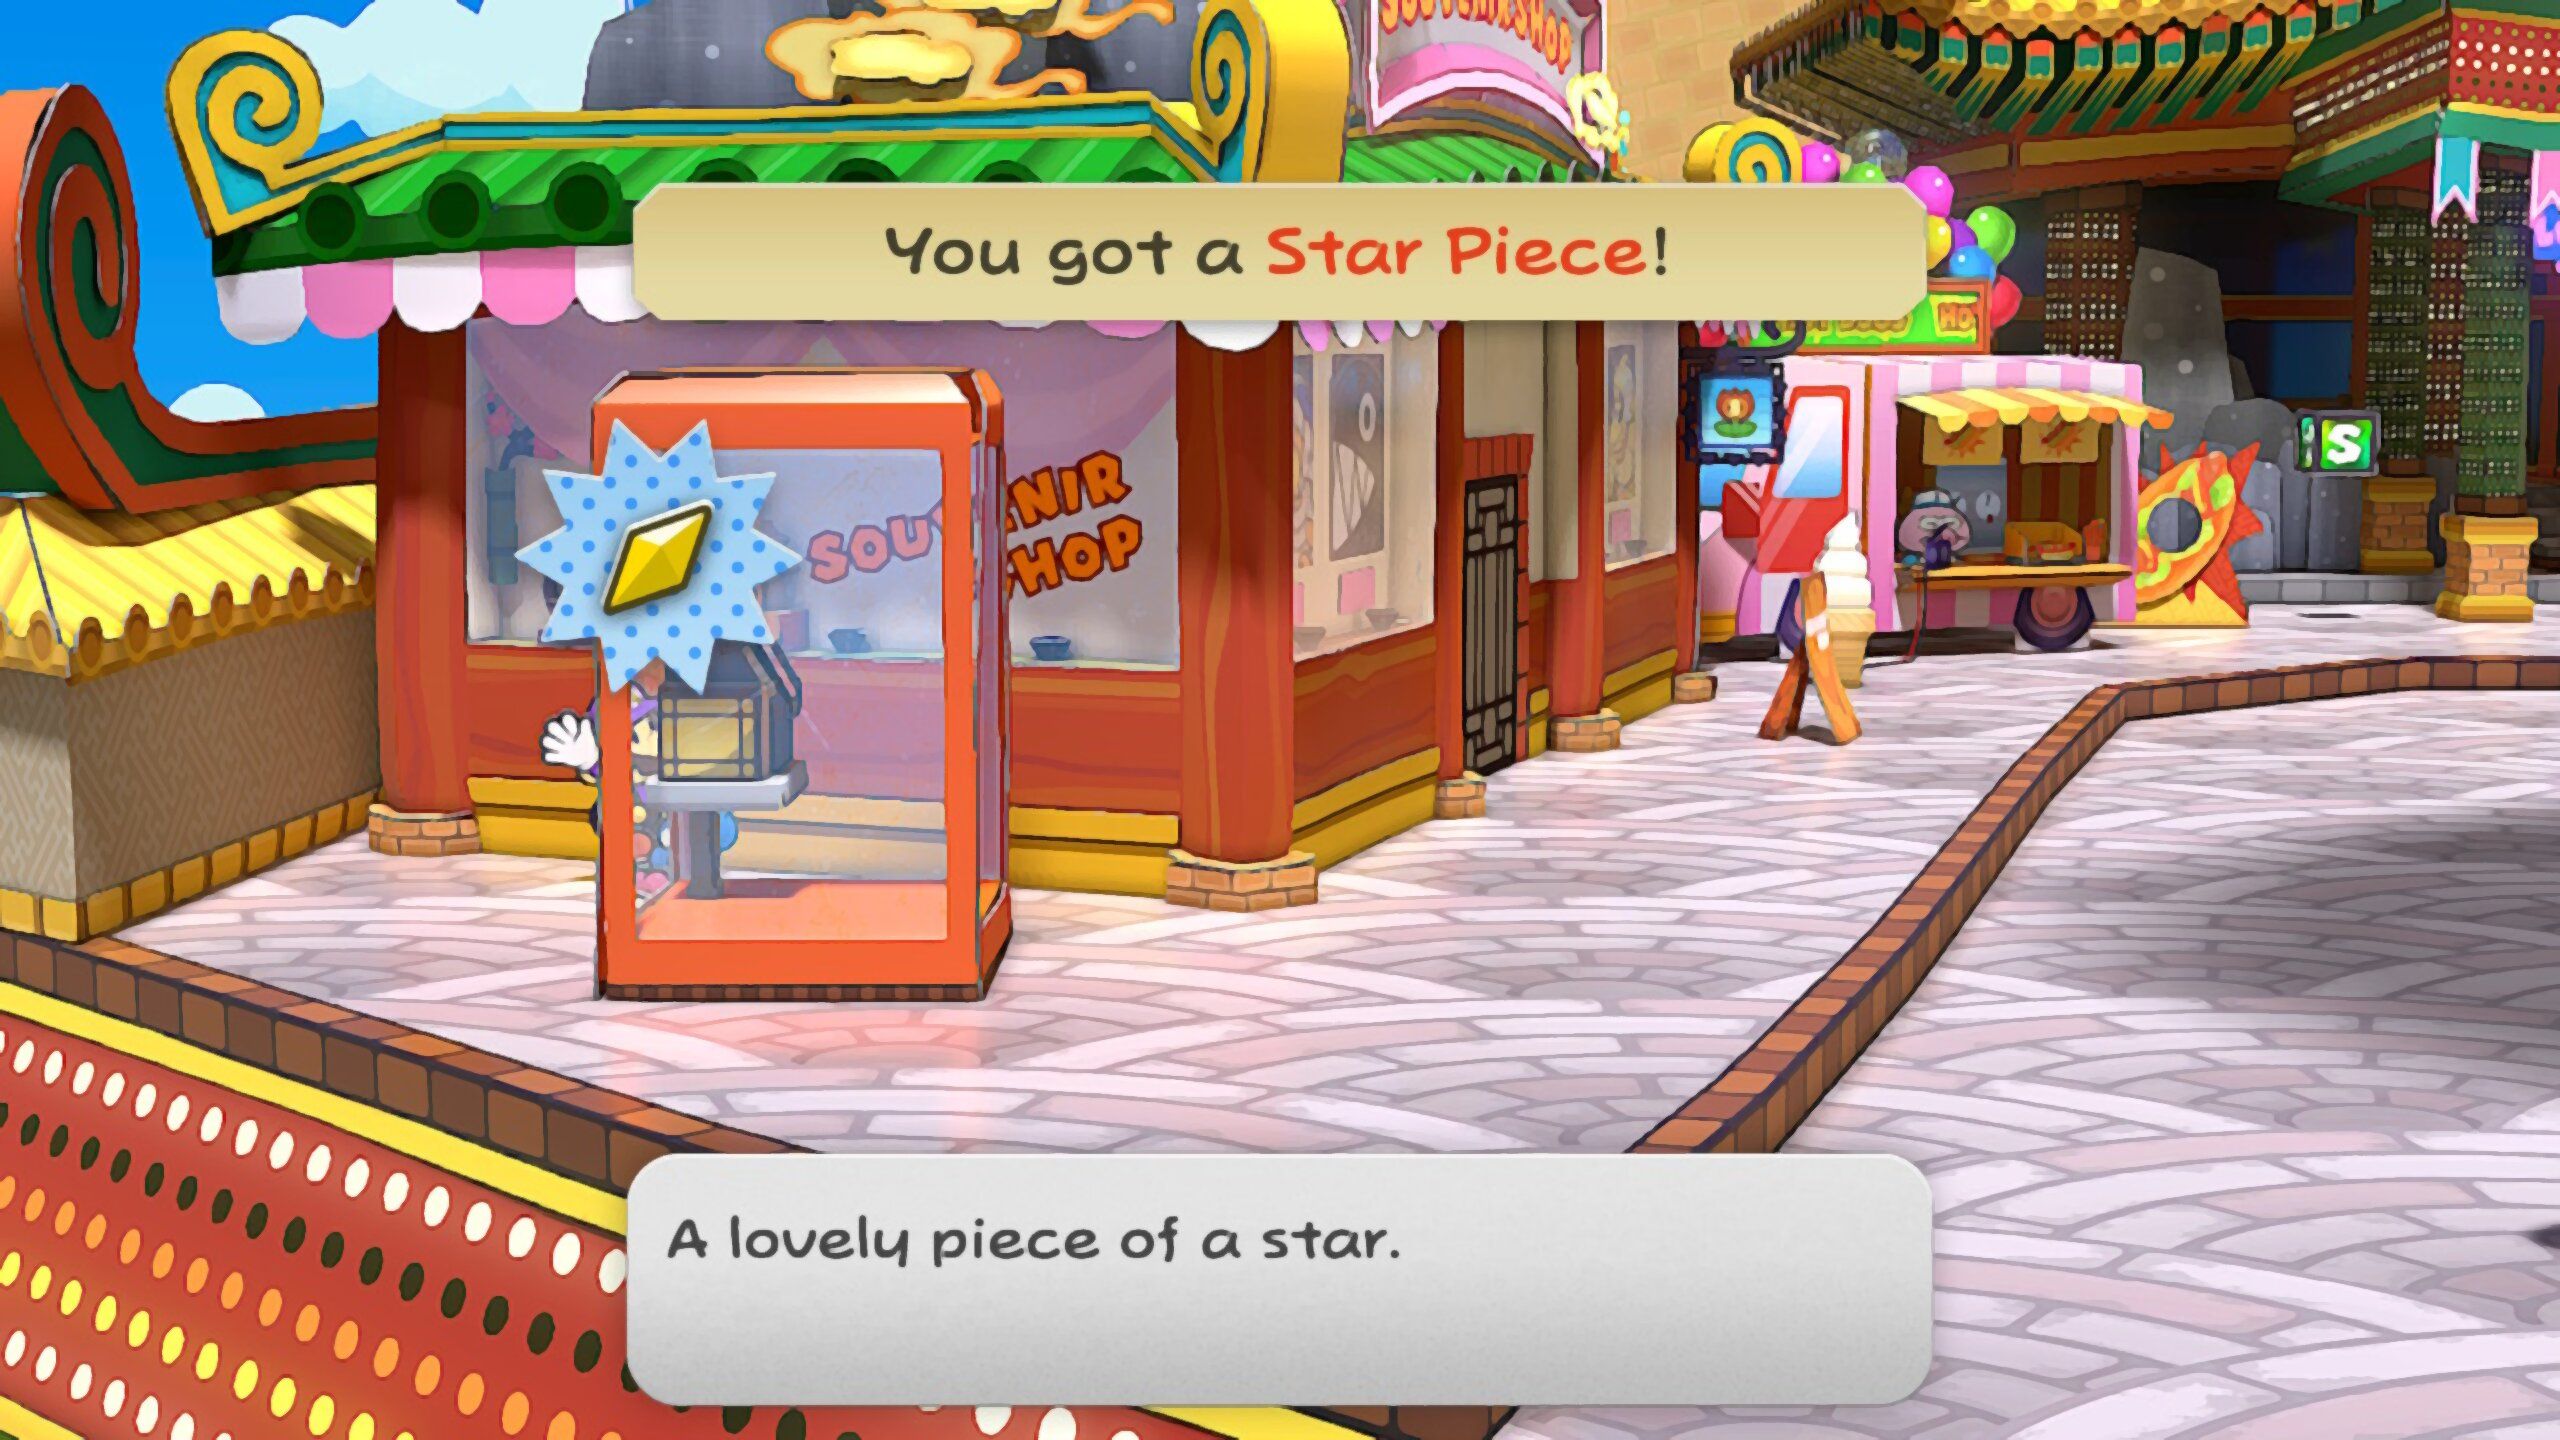 Image of a star piece behind a phone booth in Paper Mario TTYD